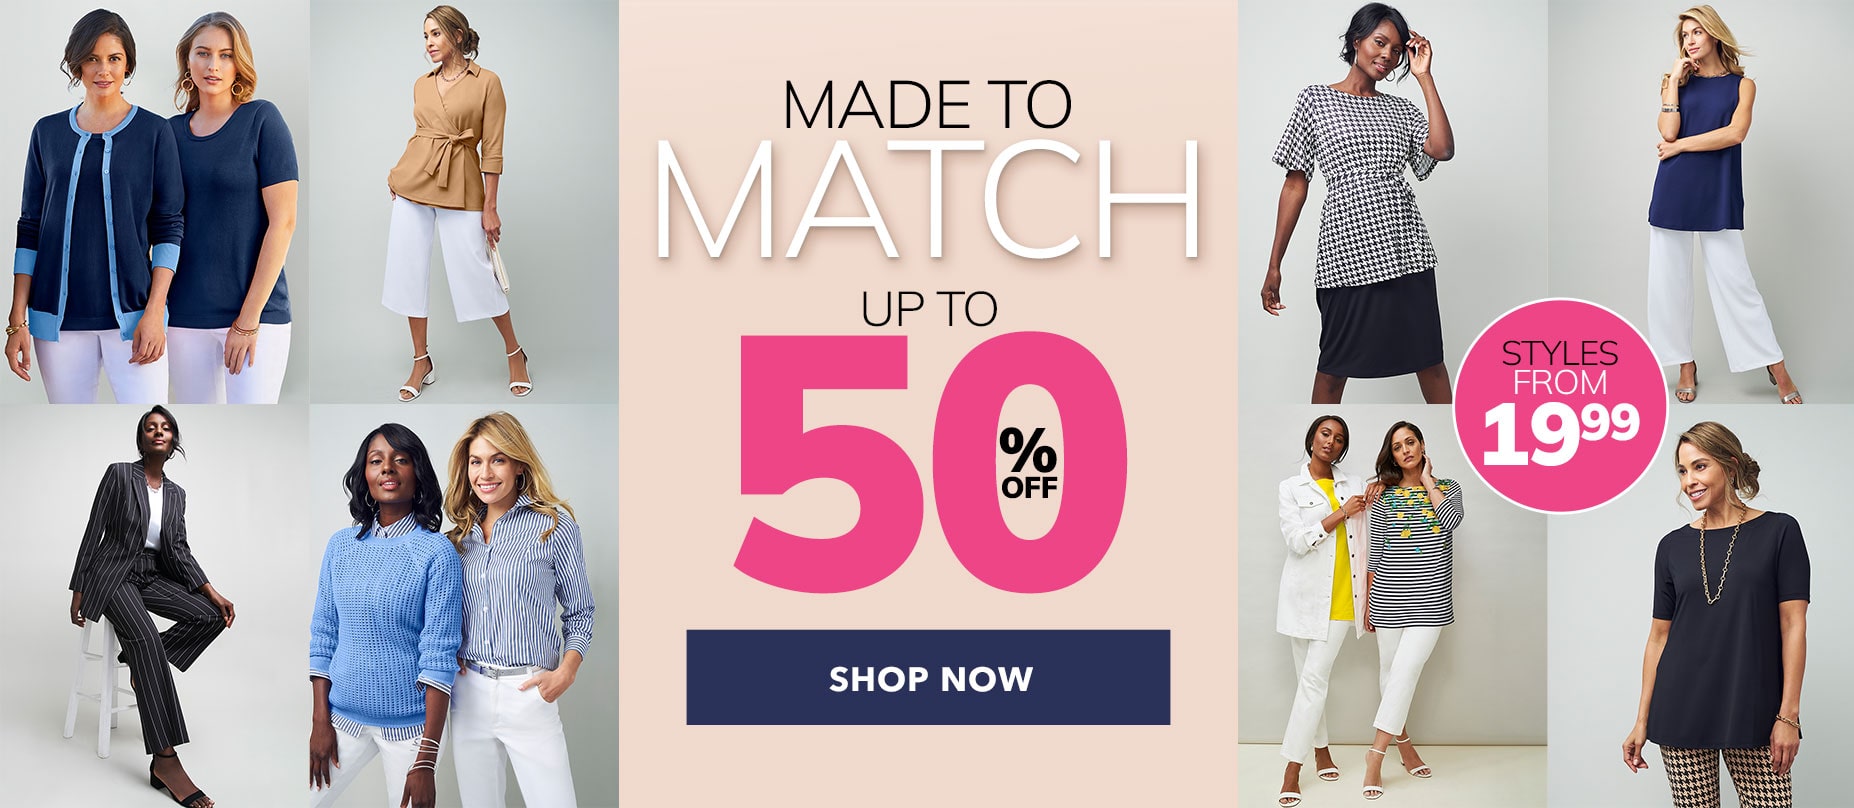 Made to Match - Upto 50% Off